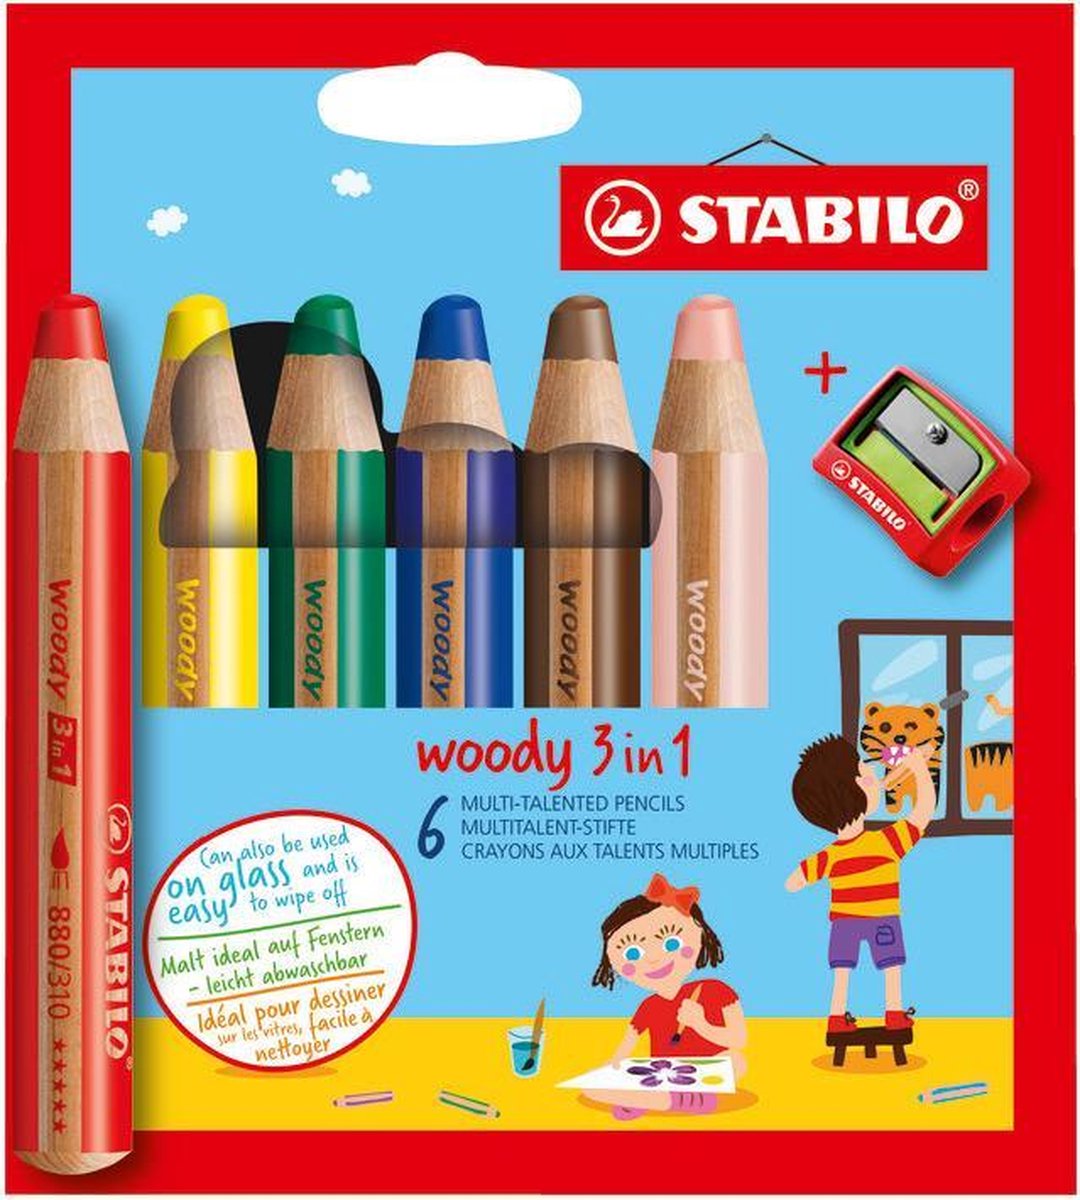 STABILO Multi Talented Pencil Woody 3 In 1 Wallet of 6 Assorted Colours EO8806-1-20 Sharpener 